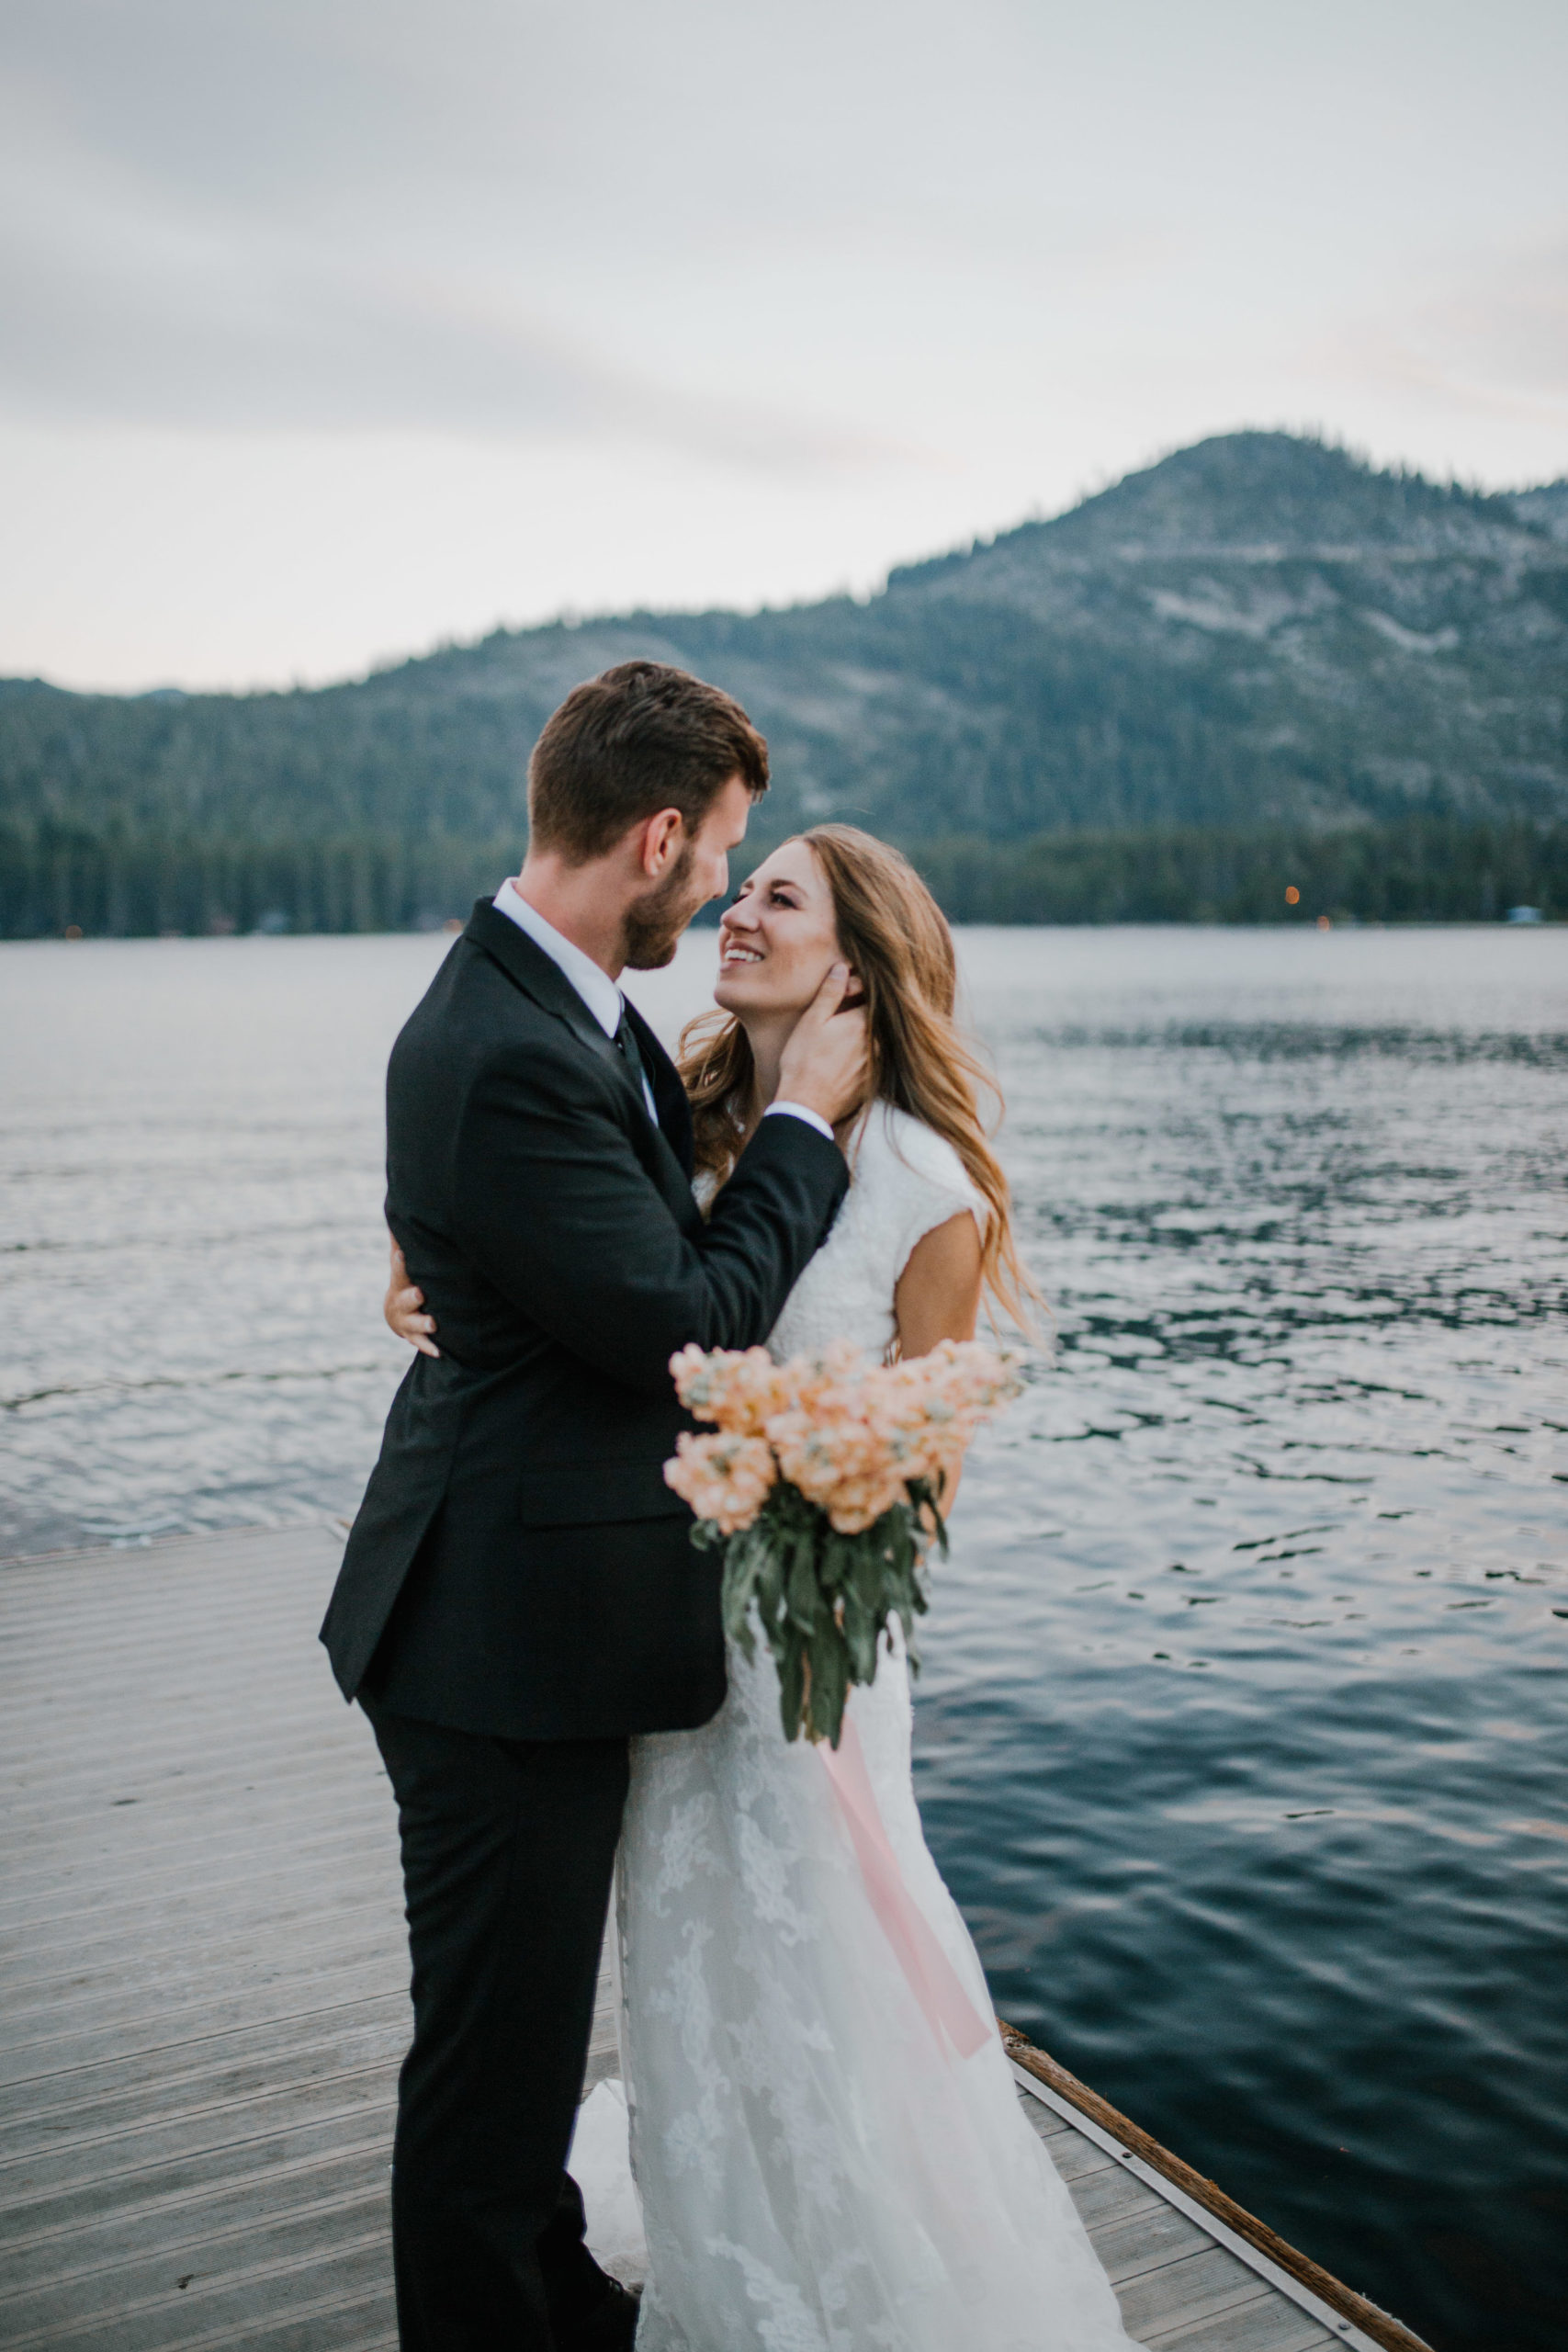 adventure Knoxville wedding photographer captures bride and groom on a dock in the middle of a lake in Tennessee at sunset as the groom embraces the bride